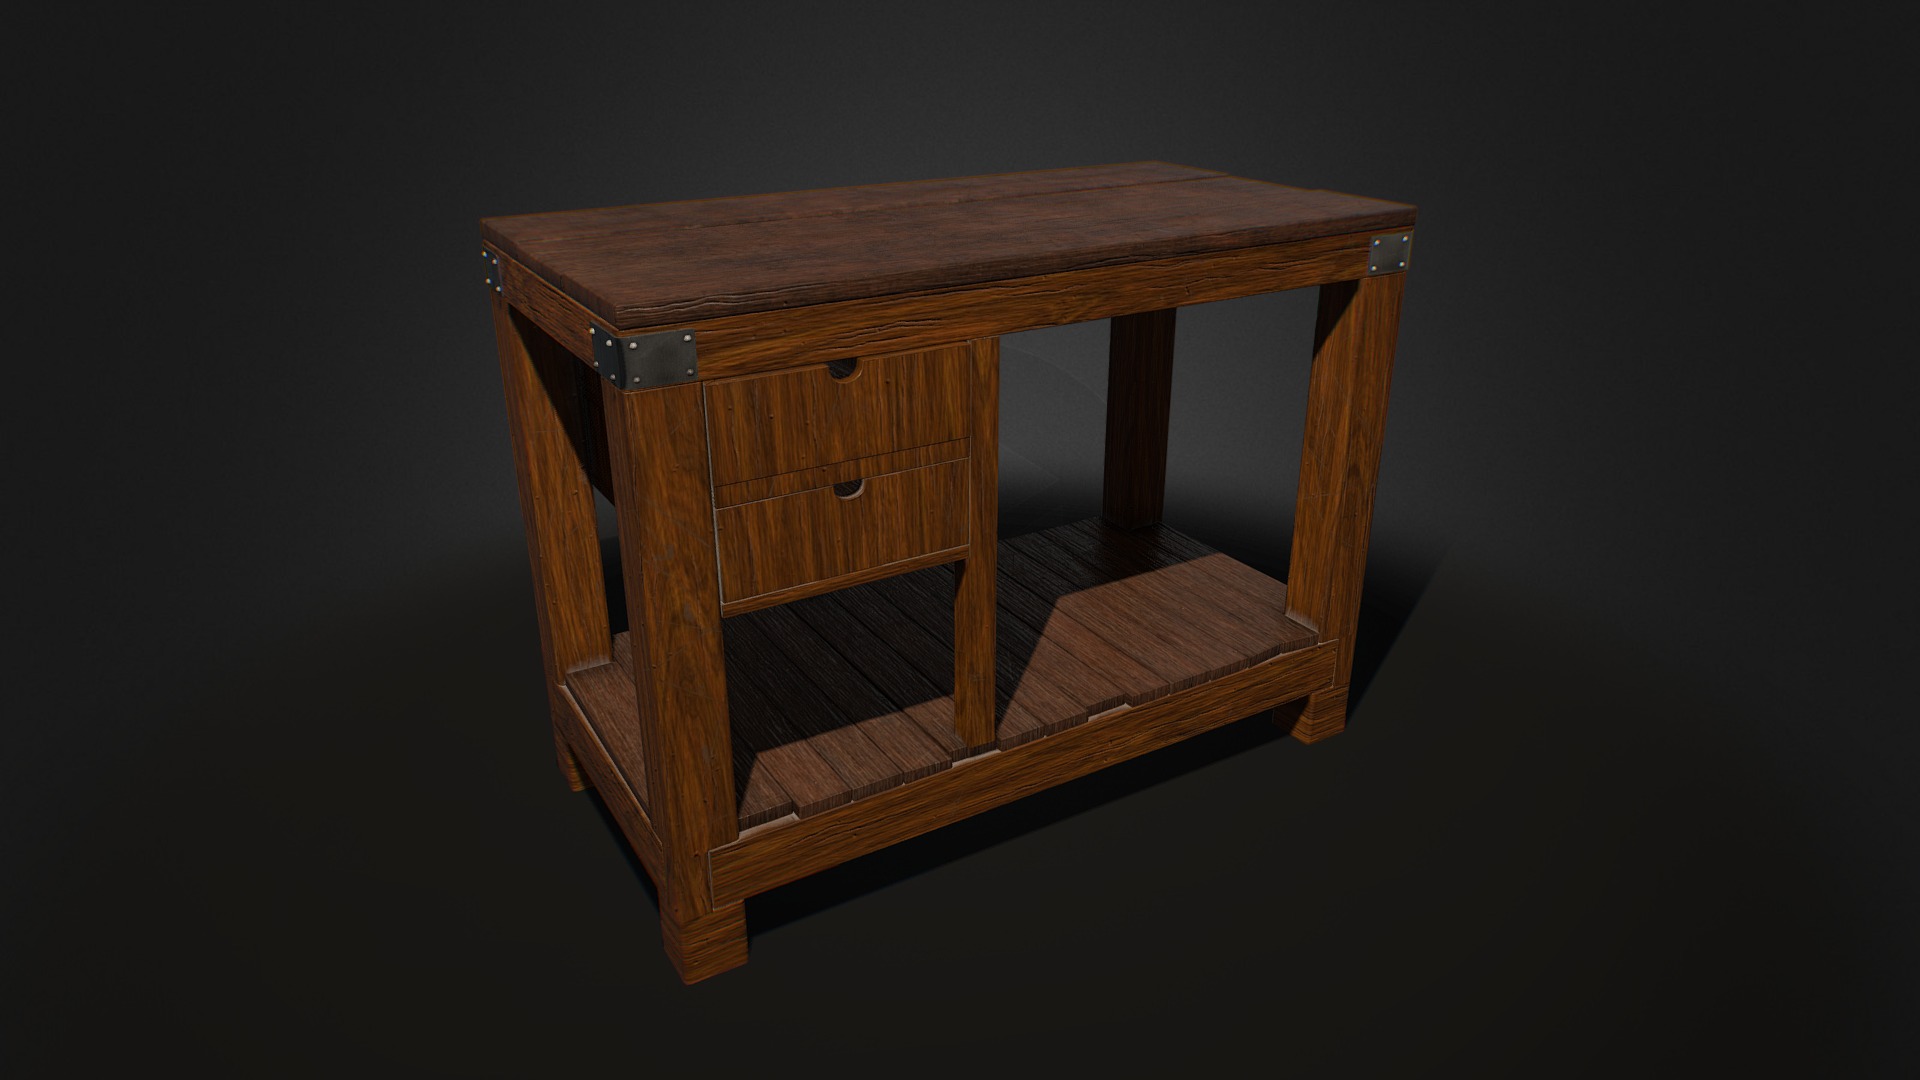 3D model Wooden Table - This is a 3D model of the Wooden Table. The 3D model is about a wooden table with drawers.